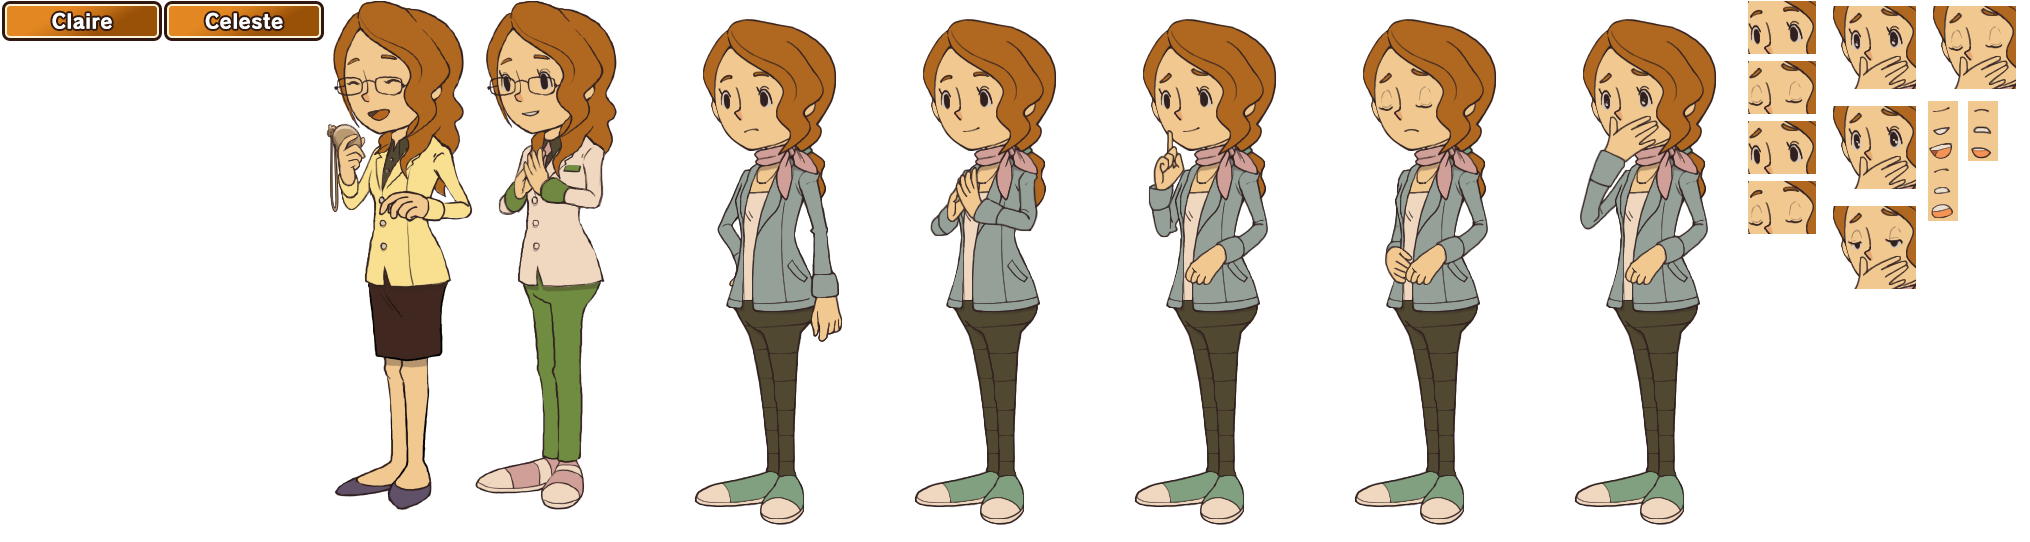 Professor Layton and the Unwound Future in HD - Claire